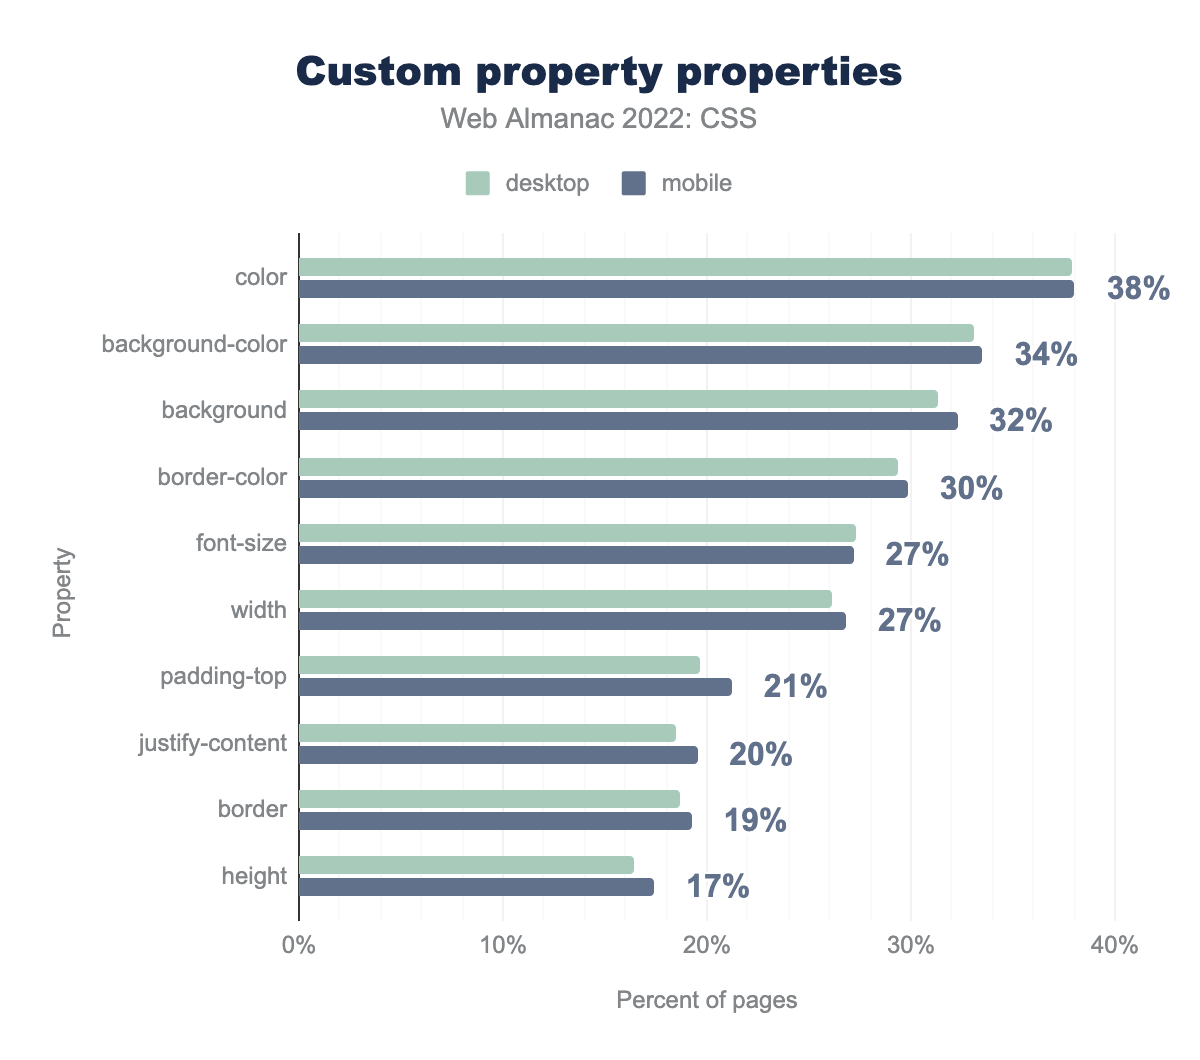 The most popular custom property properties by percent of pages.